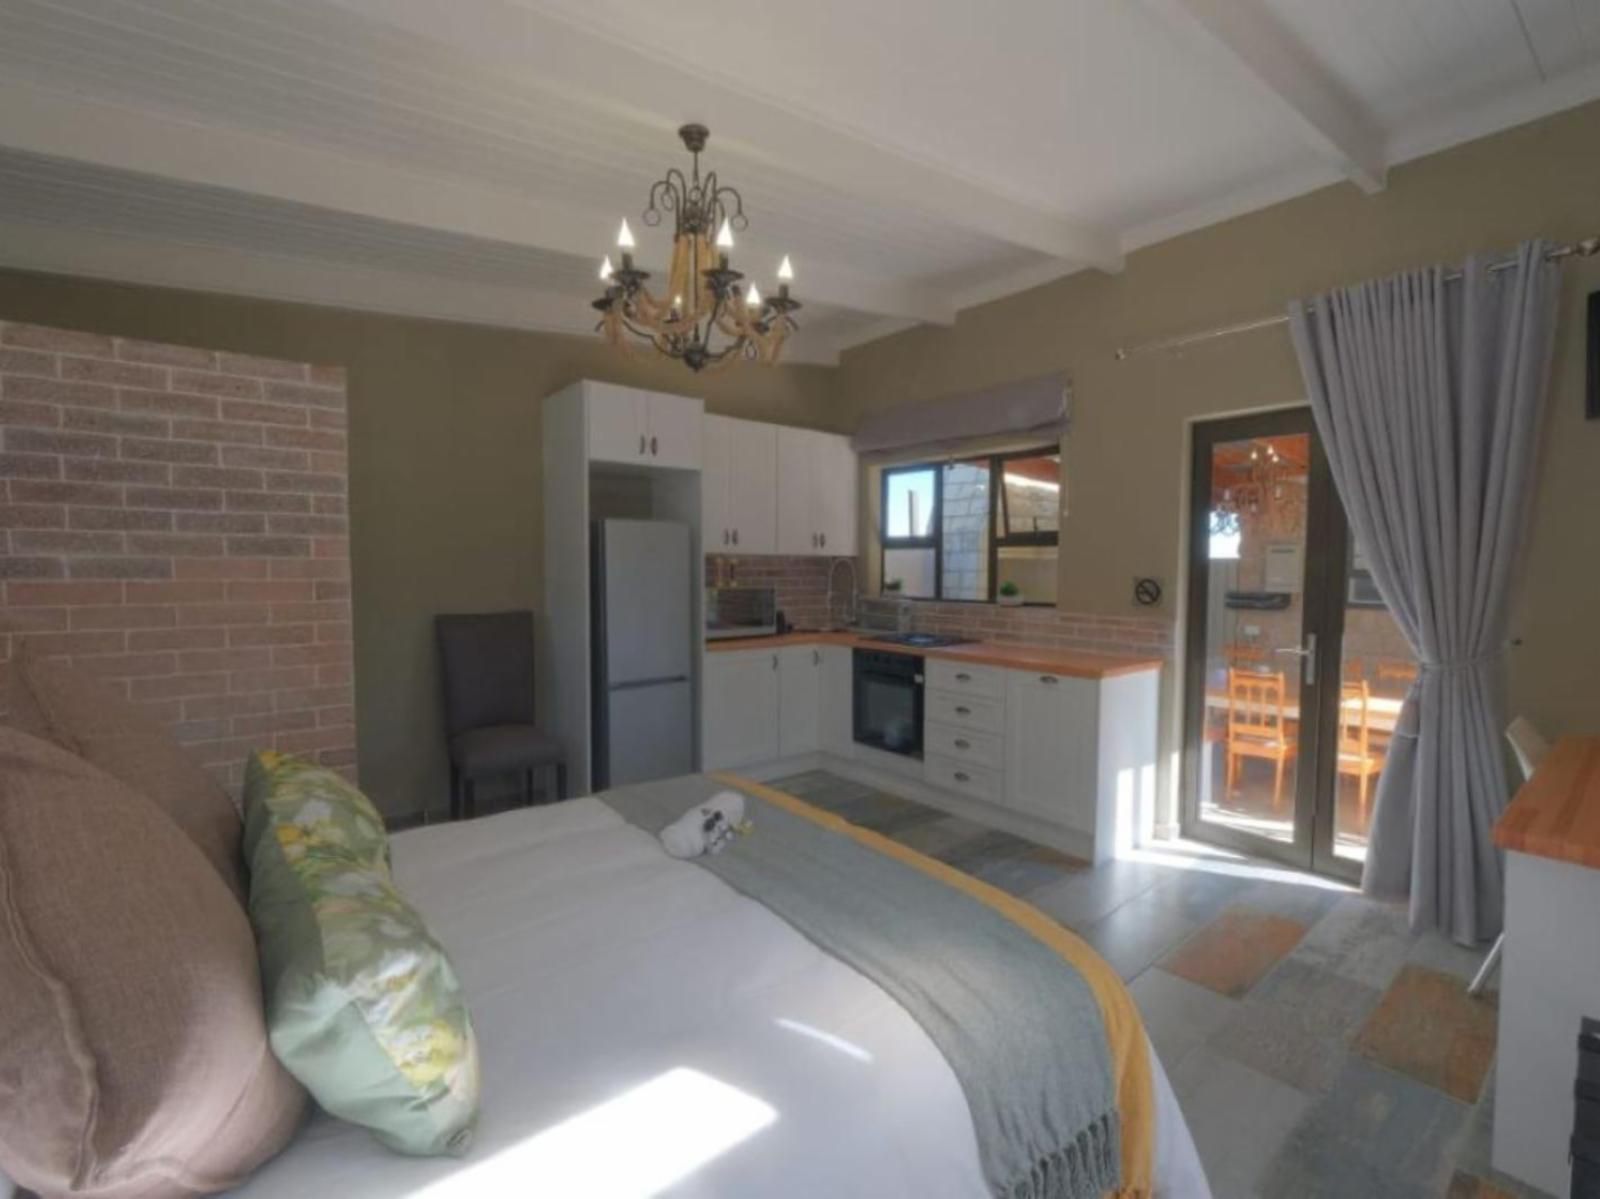 The Perfect Lodge Bethlehem Free State South Africa Unsaturated, Bedroom